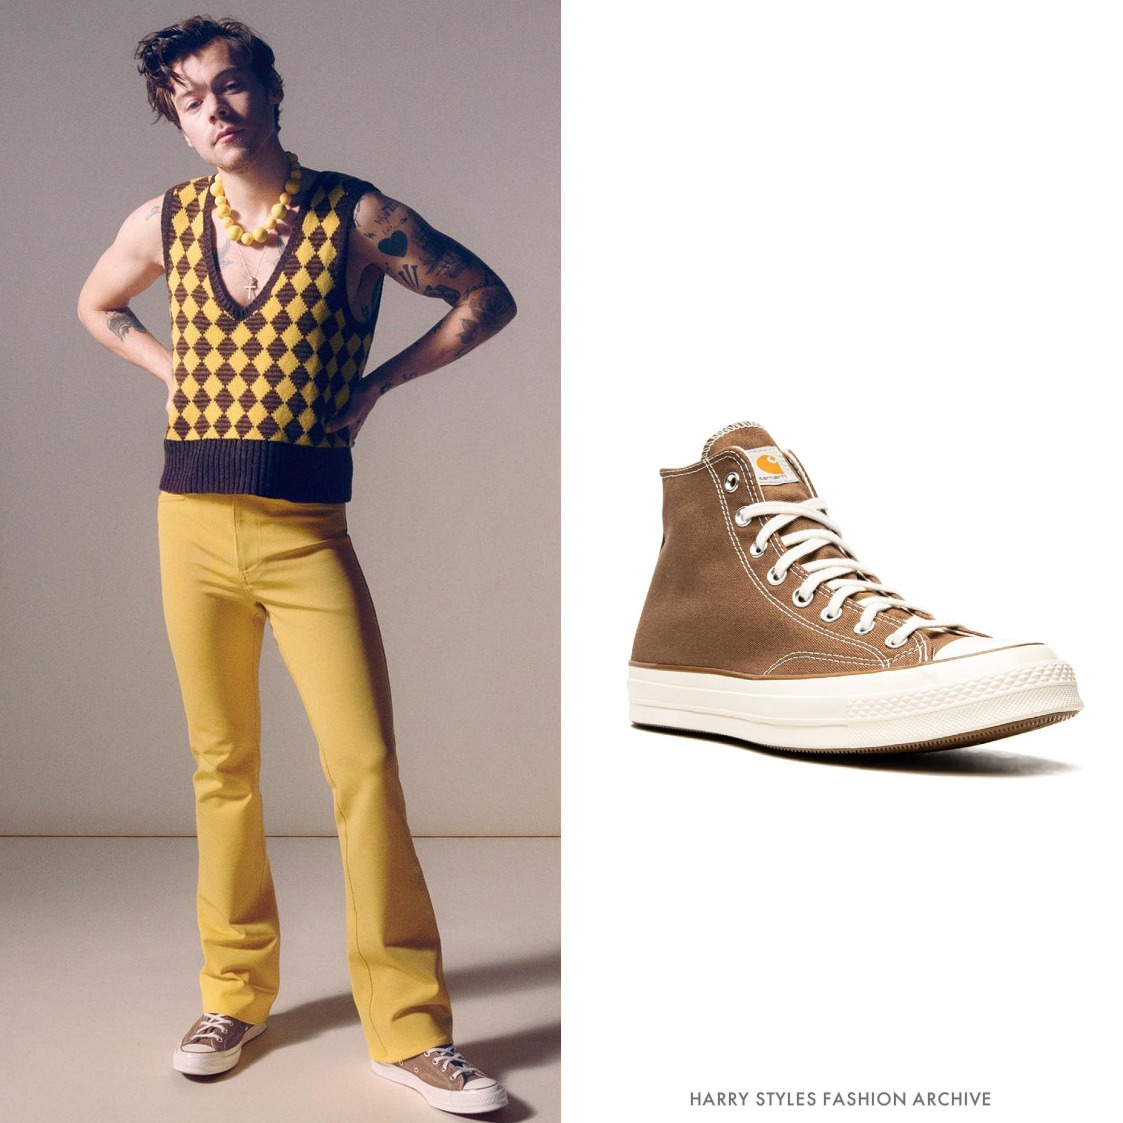 Harry Styles Fashion Archive